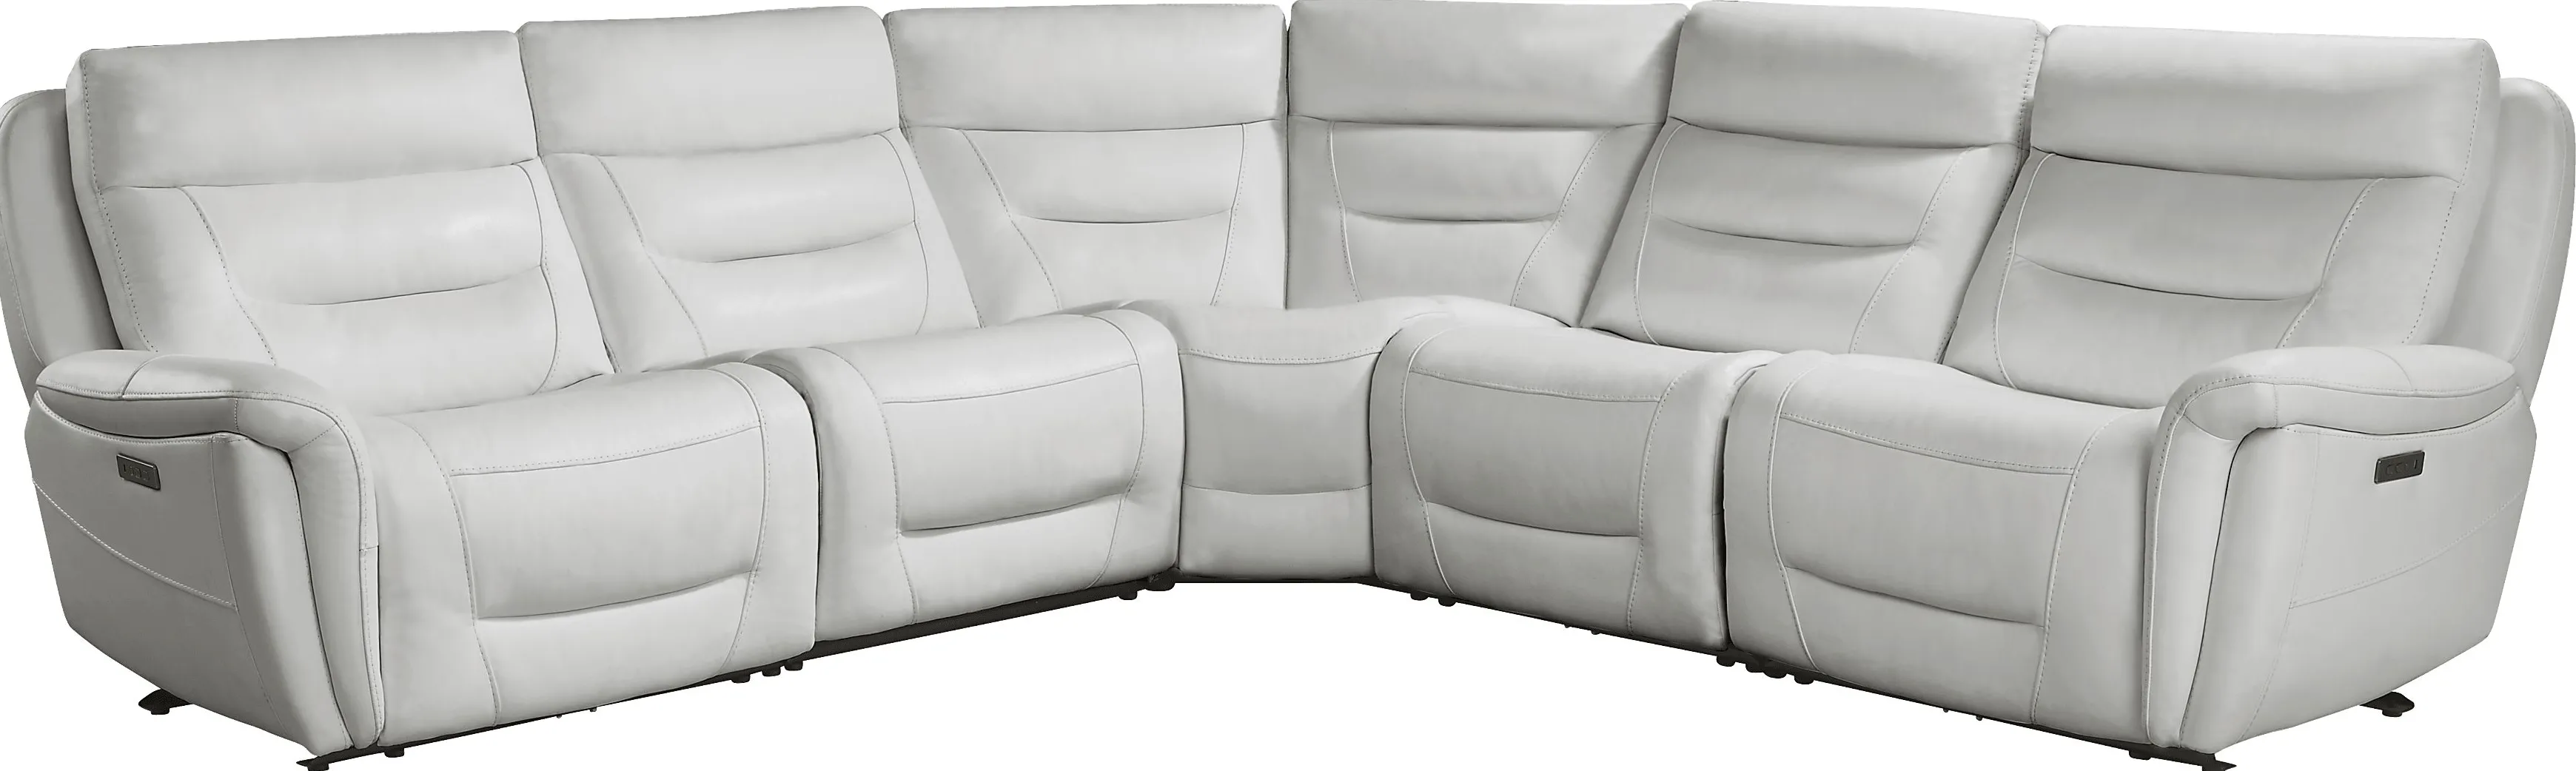 Regis Park Gray Leather 5 Pc Dual Power Reclining Sectional